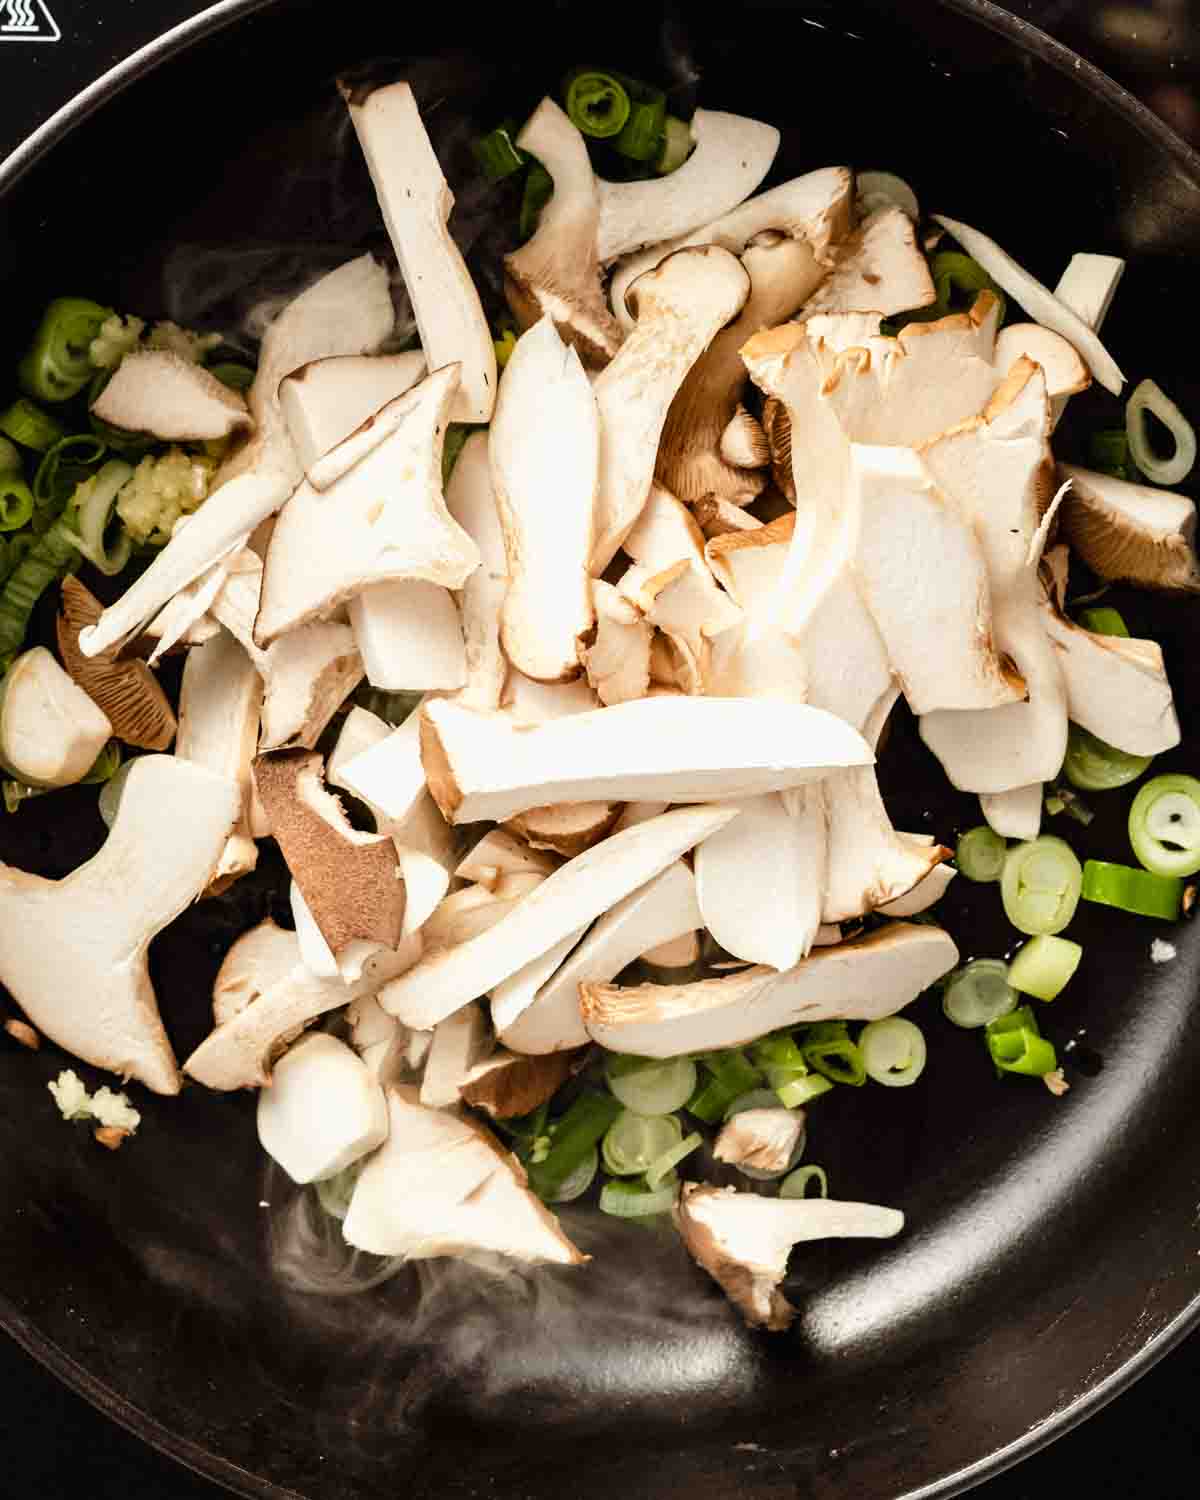 sliced mushrooms added to the pan.